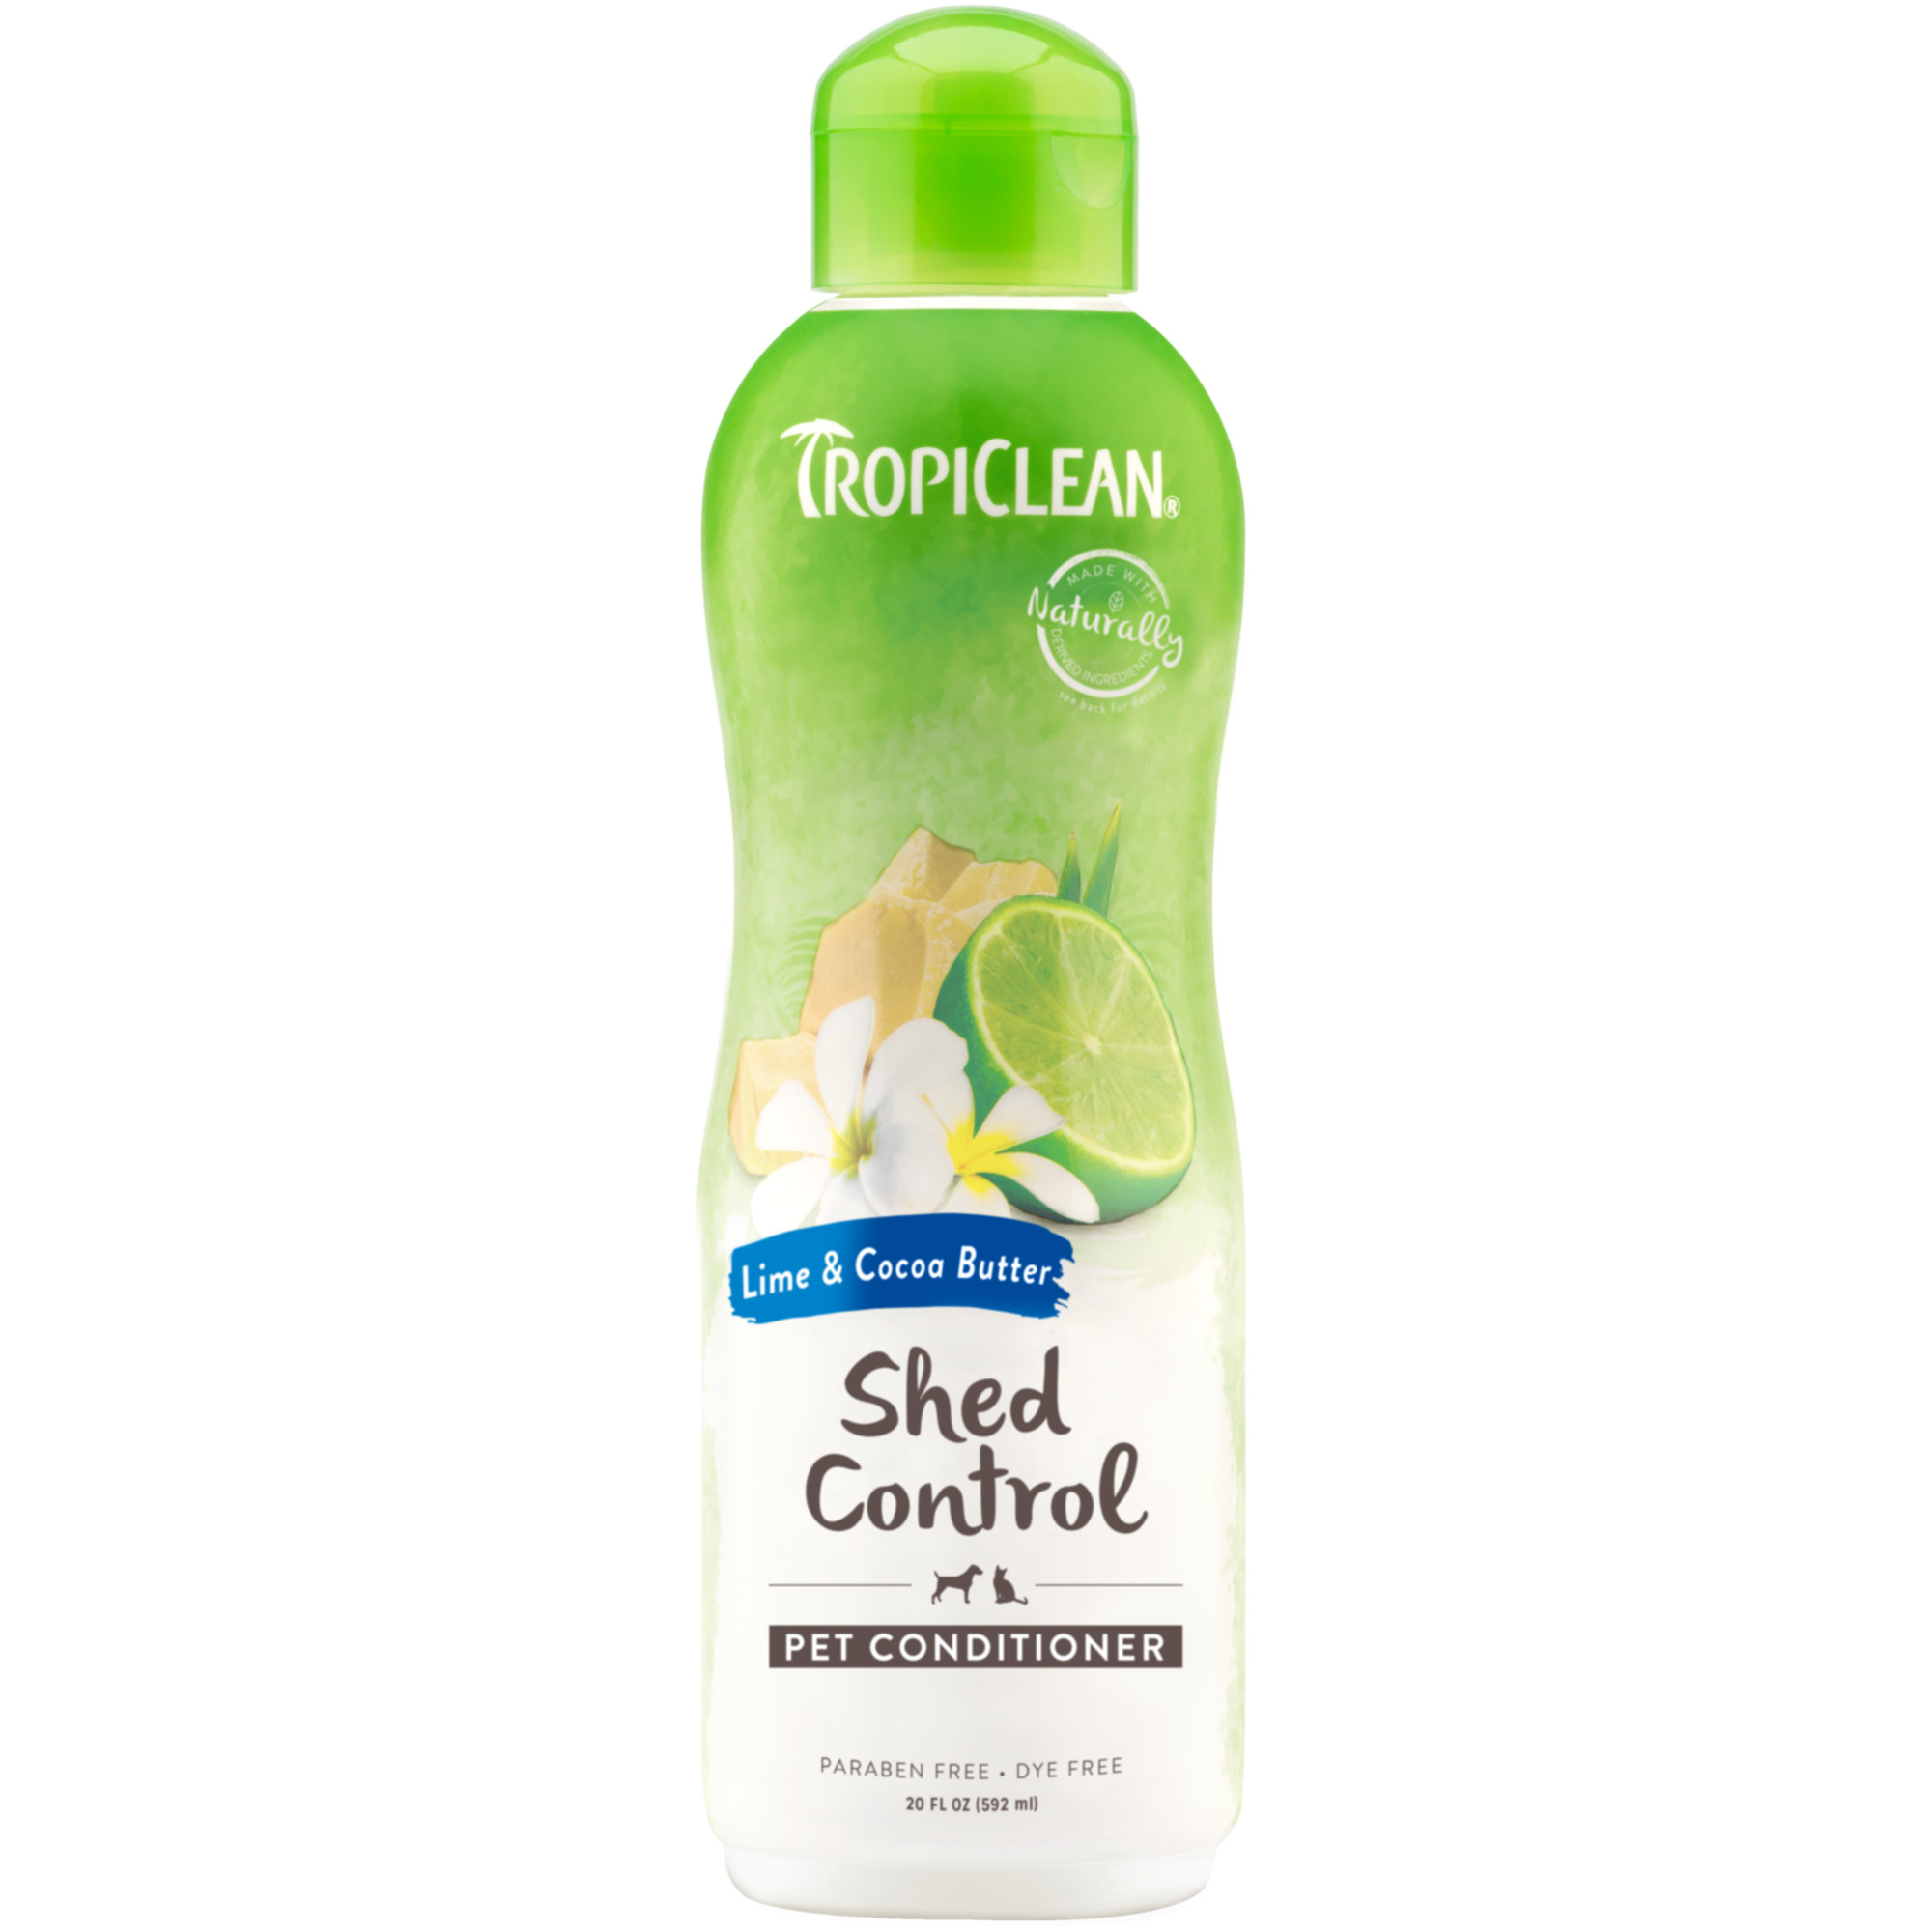 Lime & Cocoa Butter Shed Control Conditioner for Pets